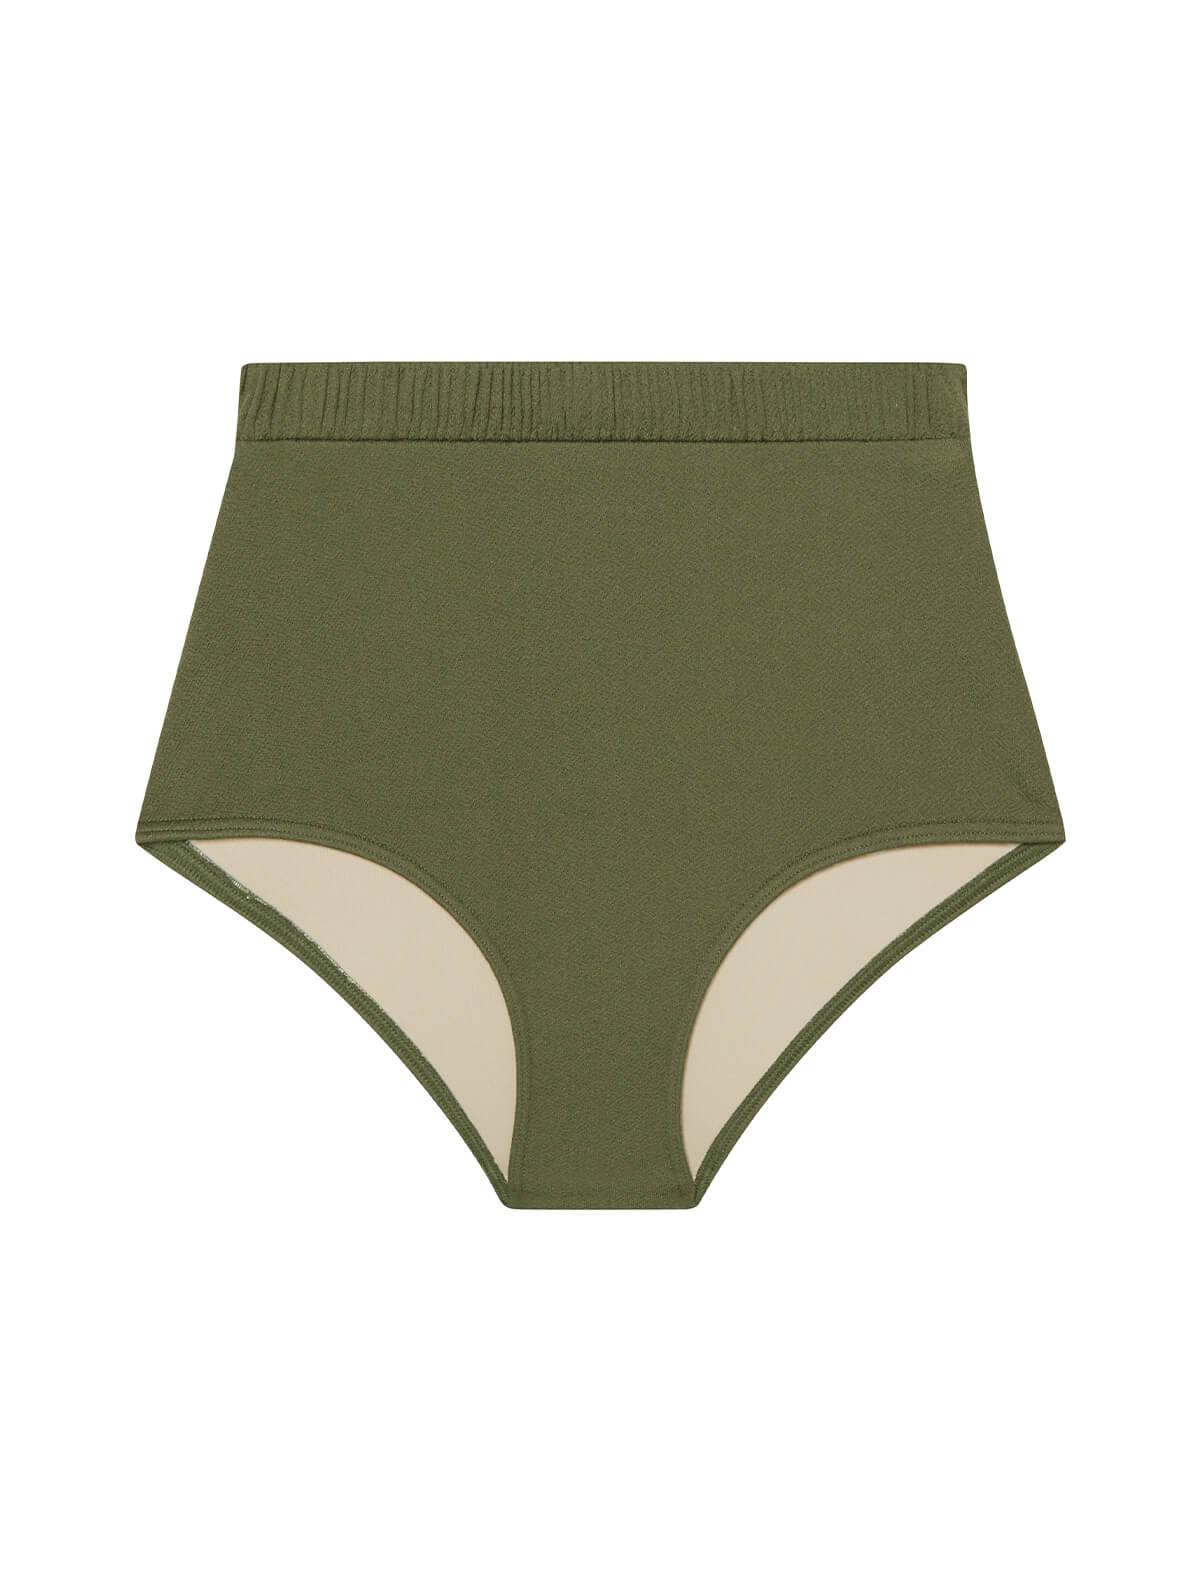 PEONY Ruched High Waisted Swim Brief in Pear | CLOSET Singapore